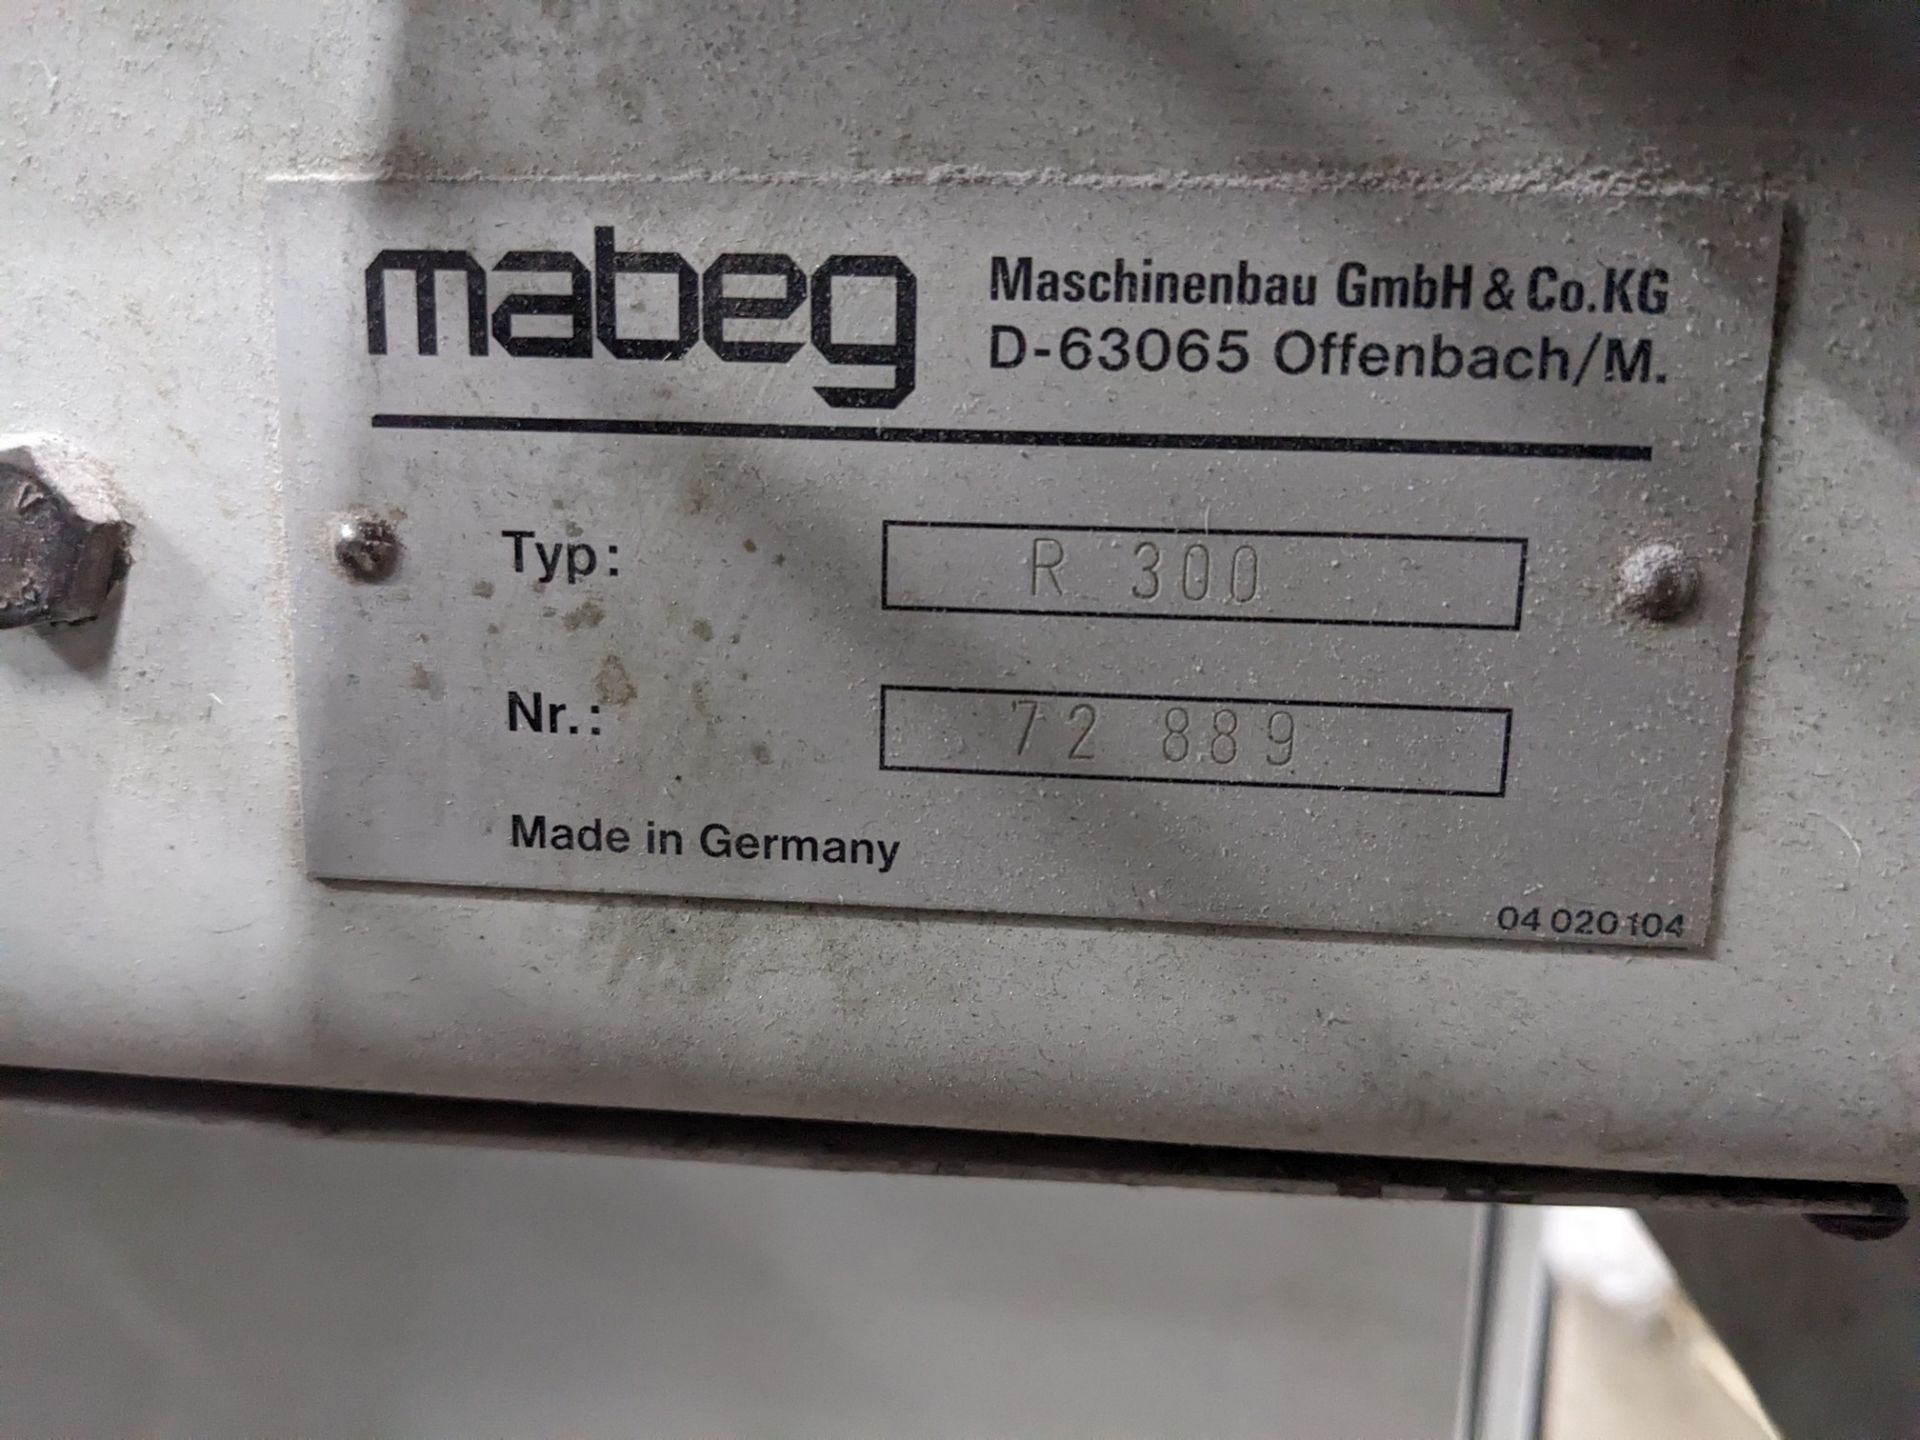 1995 MAN ROLAND 300 6-COLOUR OFFSET PRINTING PRESS, MODEL R306, S/N 25152B, TOTAL SHEET COUNT - Image 30 of 53